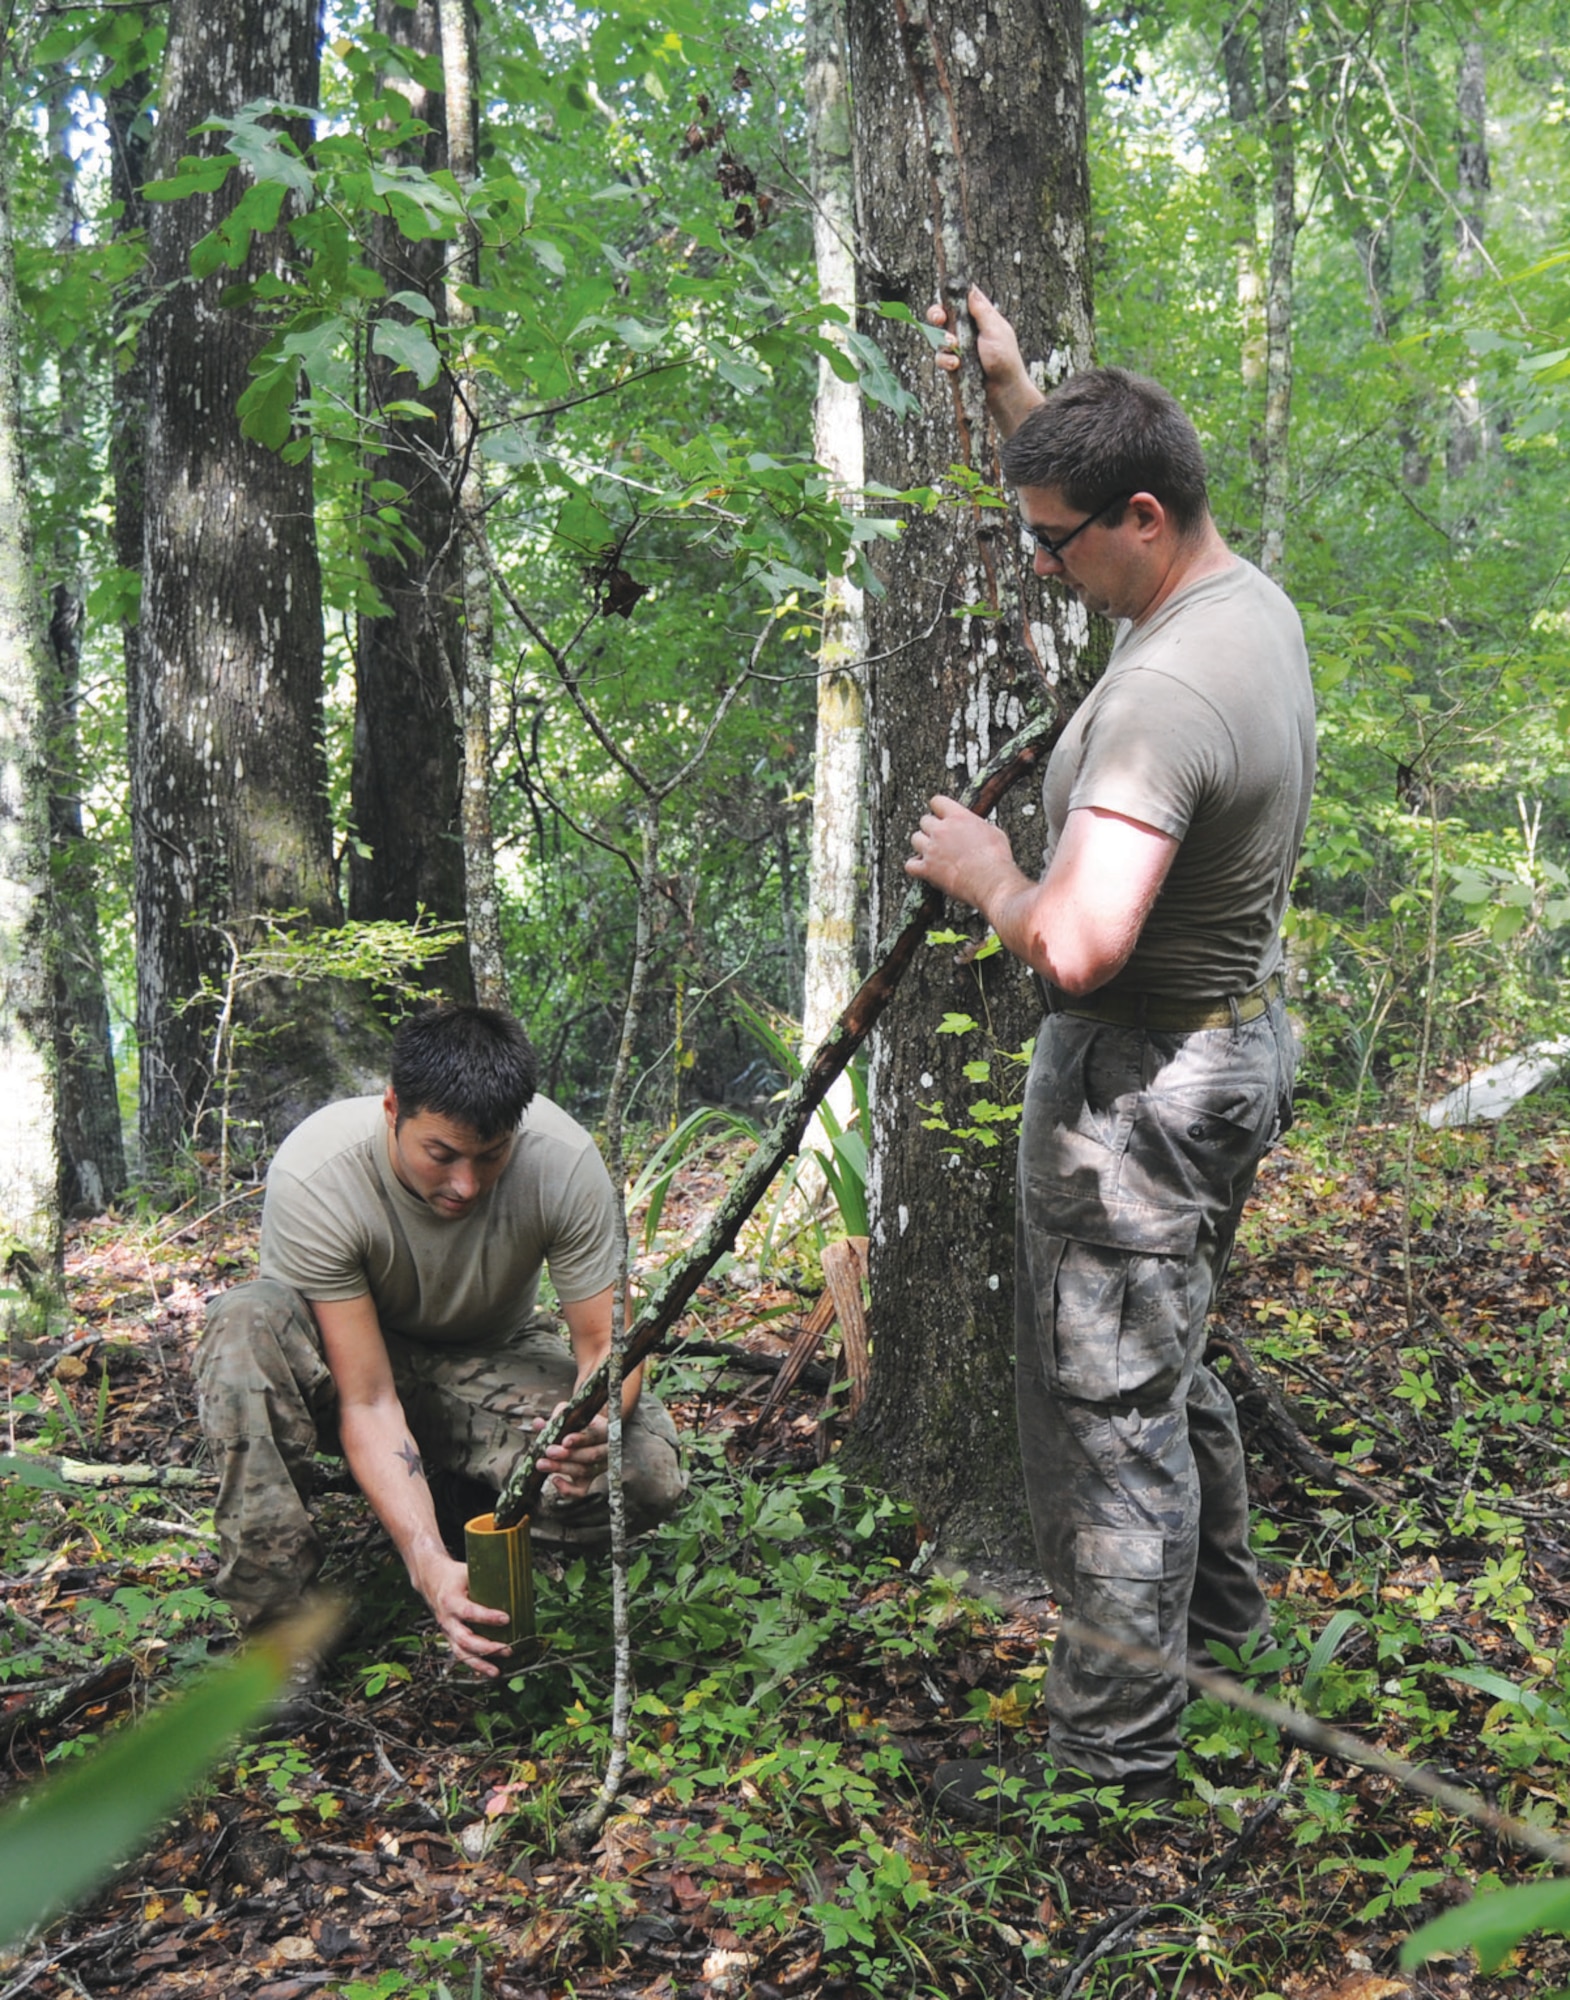 Students collect water from a water vine into a segment of bamboo during a tropical survival exercise in the Atchafalaya Basin Aug. 30-Sept. 1.  (U.S. Army photo by Jean Dubiel)